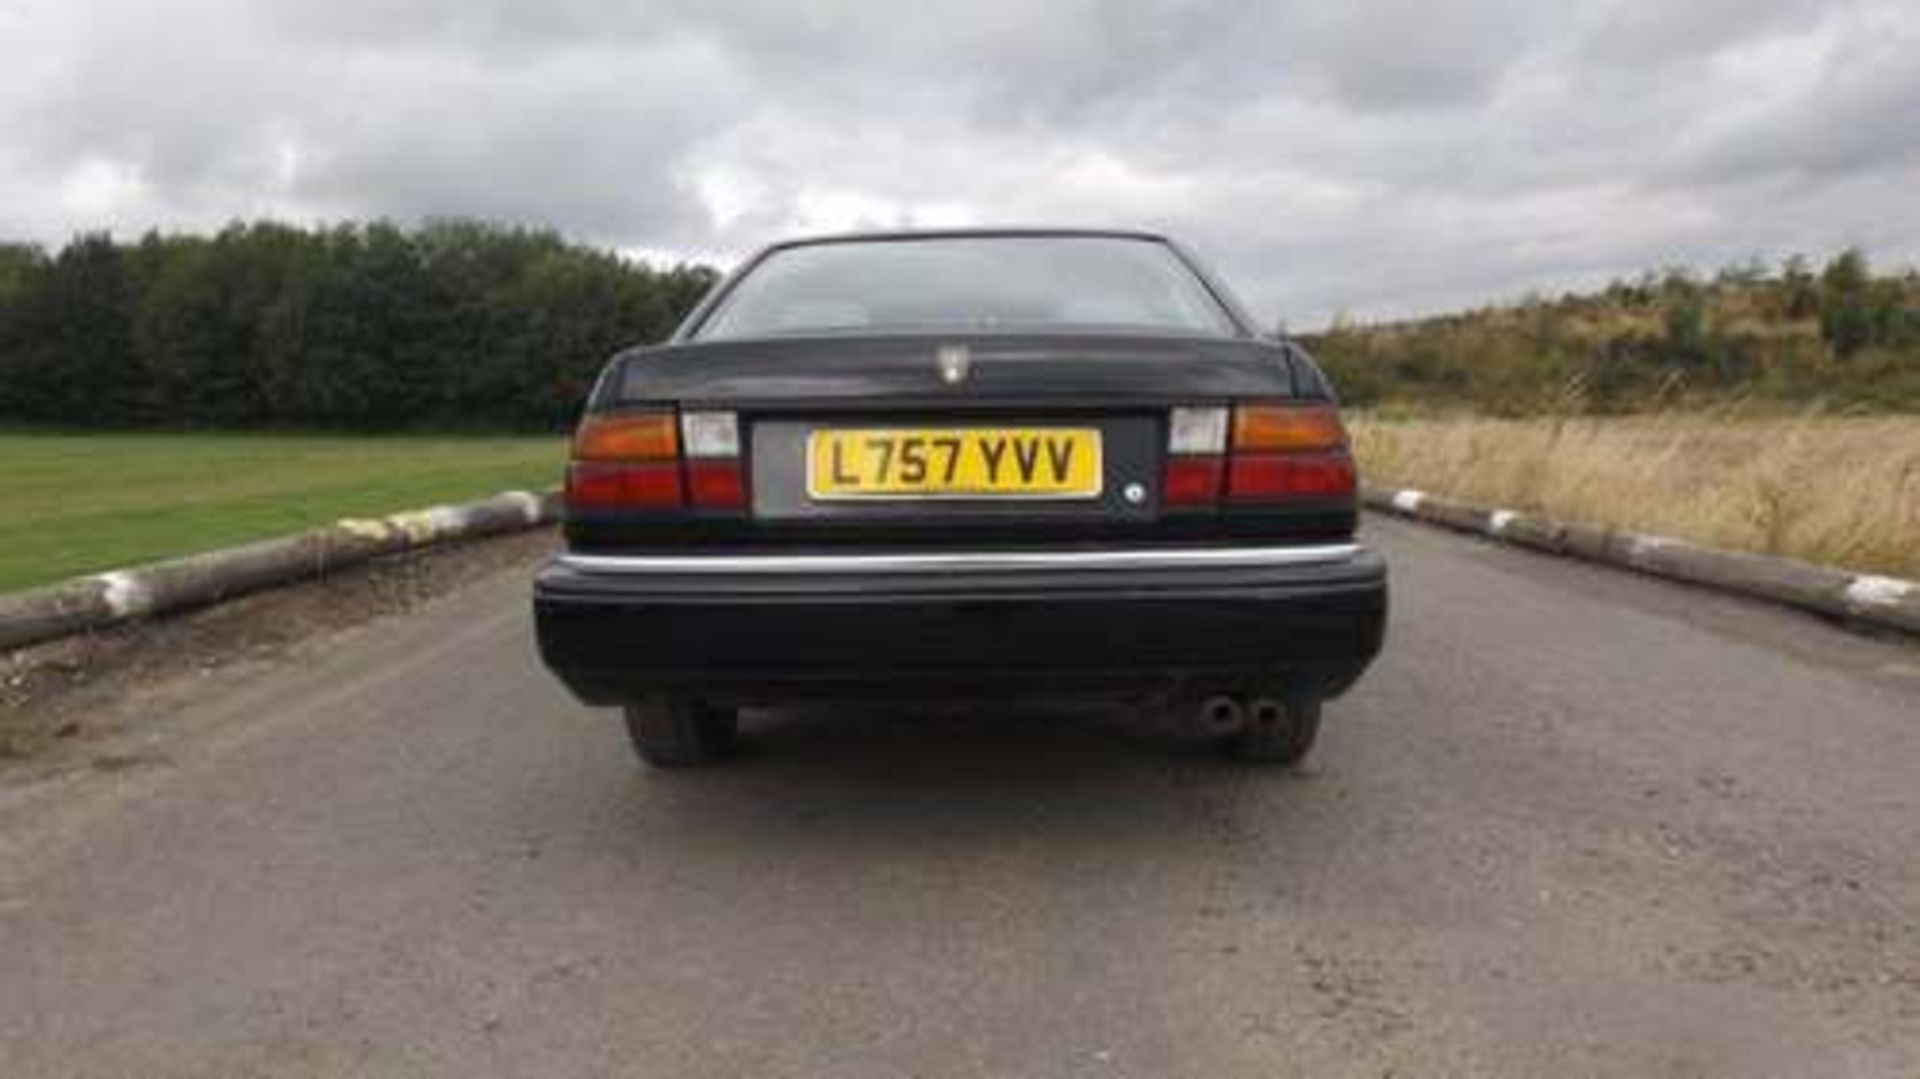 ROVER 827 SI - 2675cc - Image 5 of 10